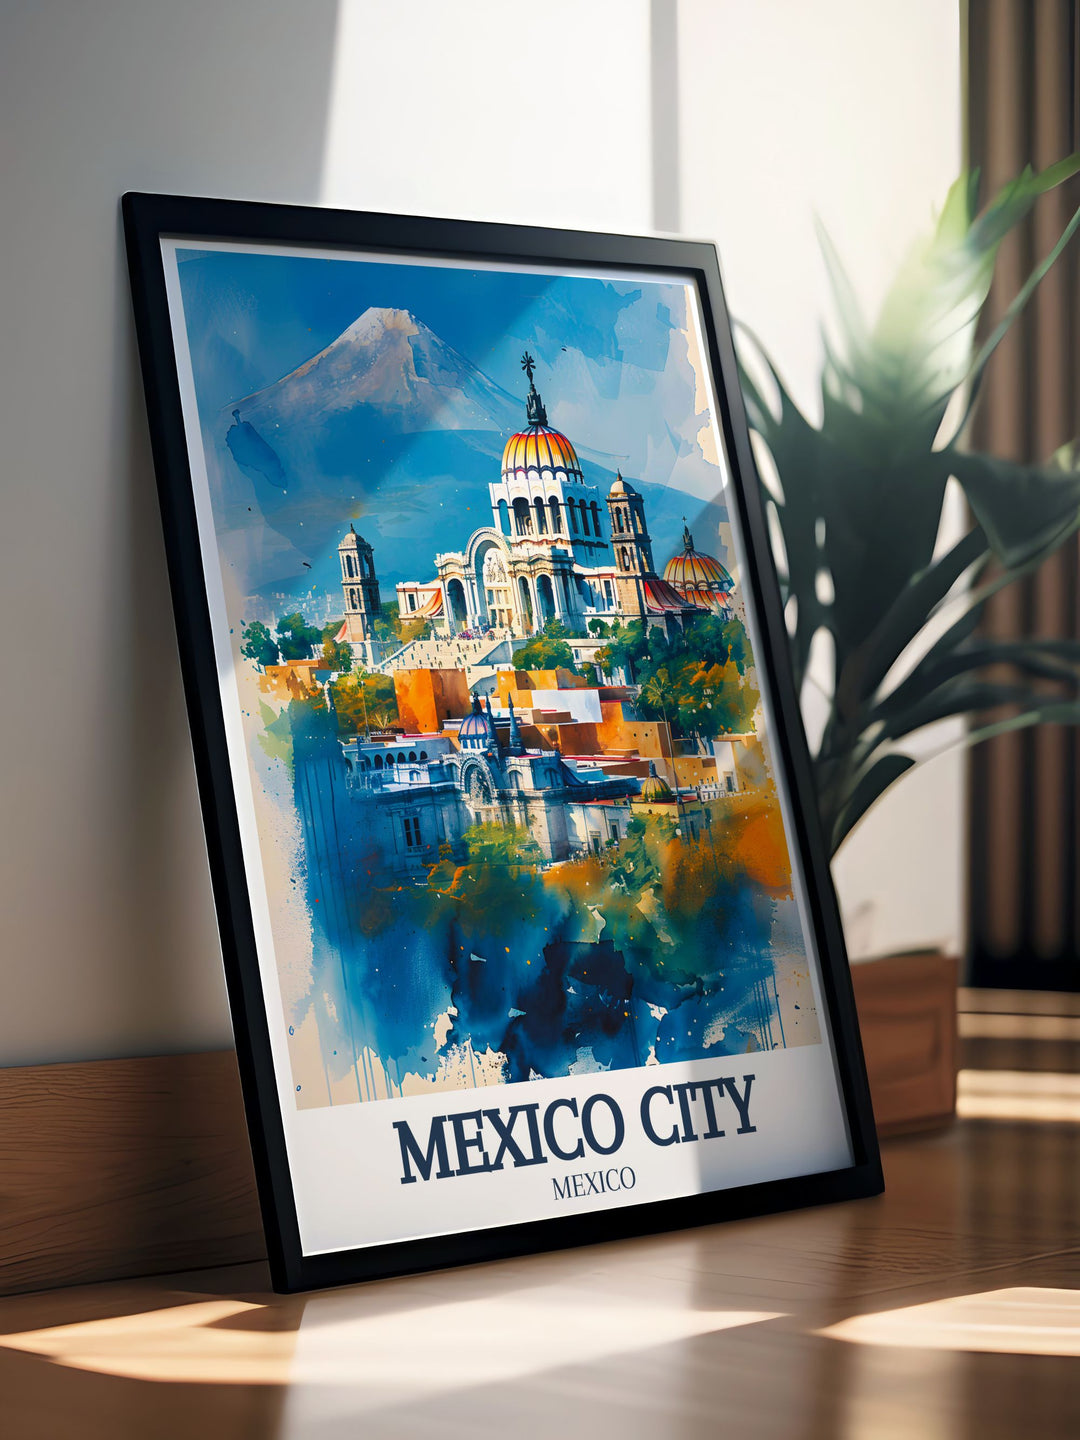 Elegant Mexico City artwork depicting the Metropolitan cathedral Zocalo Chapultepec castle. This print is a beautiful addition to any home or office, showcasing the rich heritage and dynamic spirit of Mexico City. A thoughtful gift for art lovers.